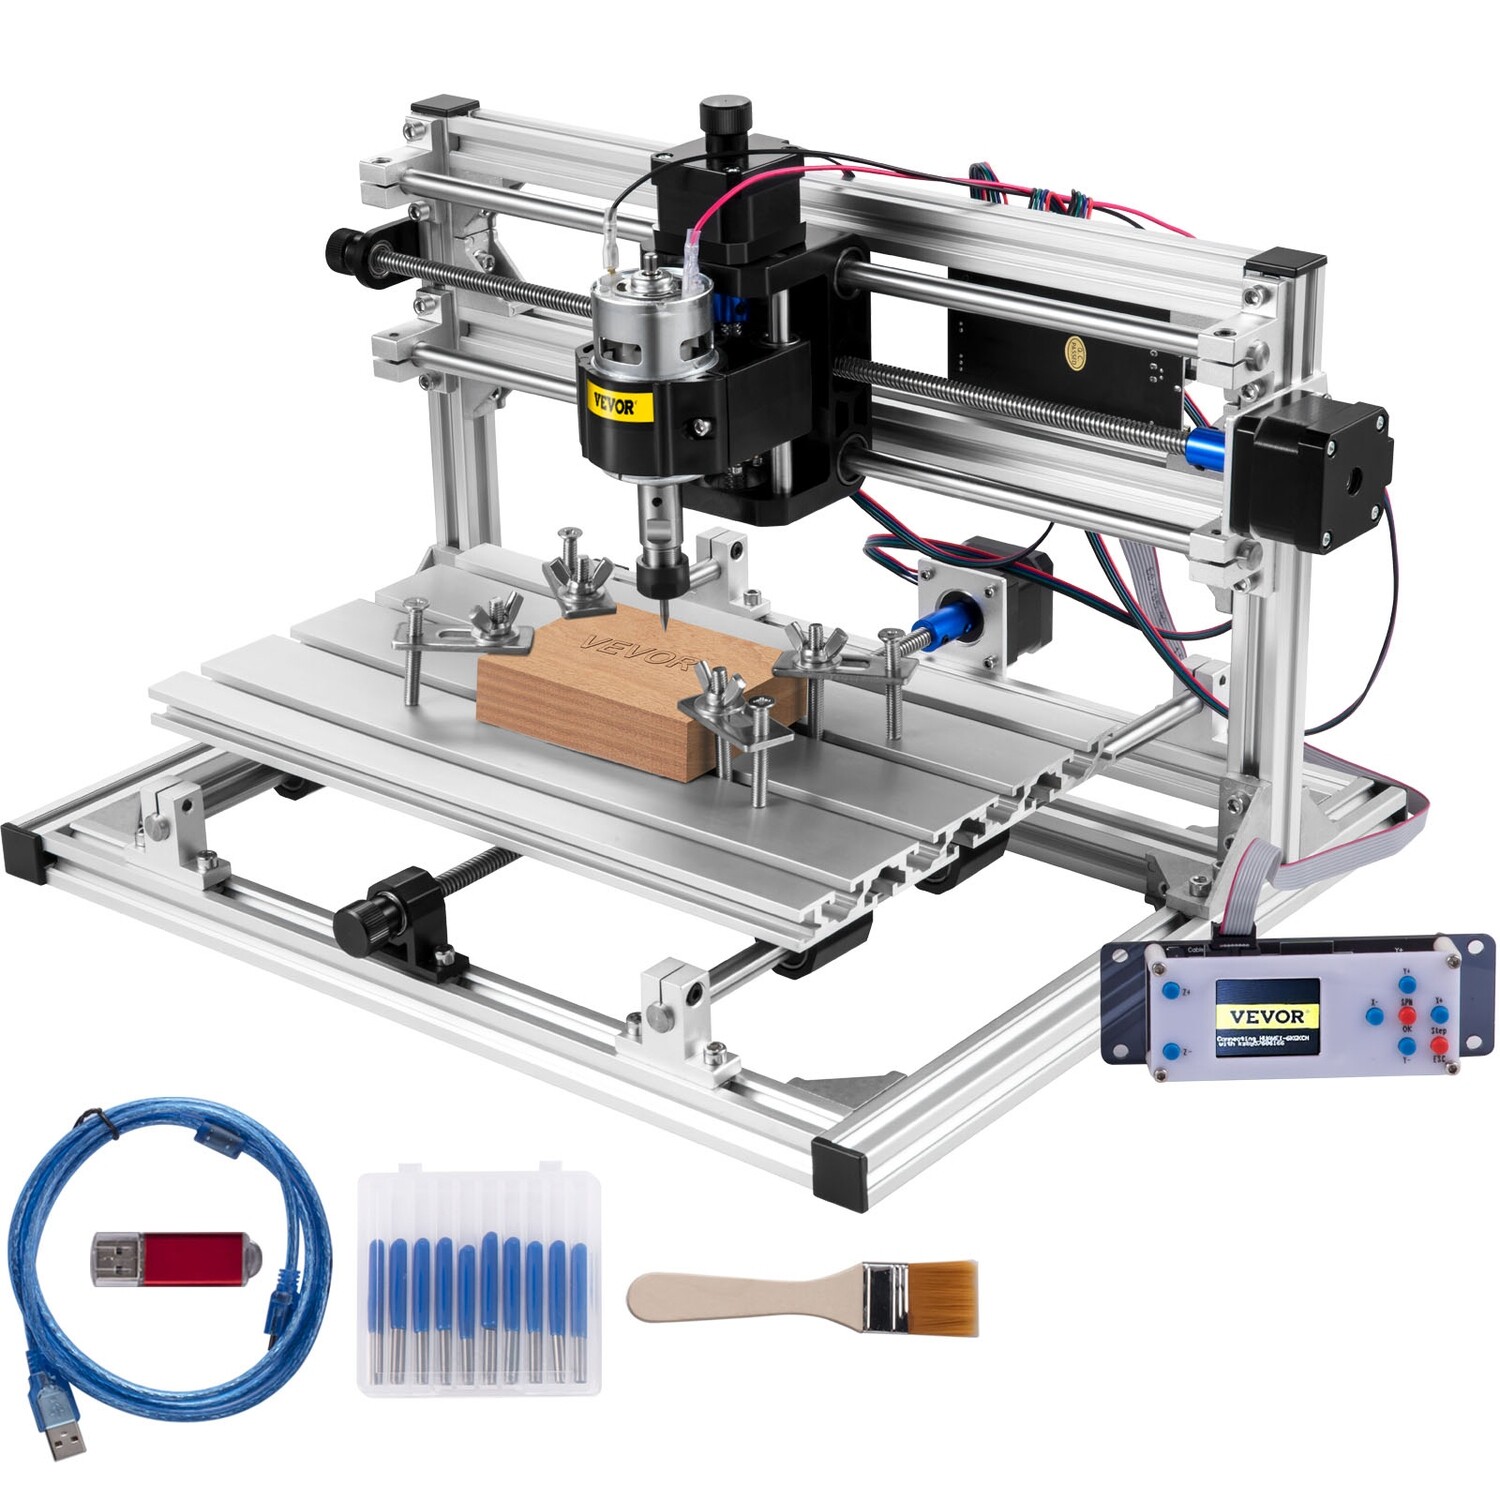 a 3-axis 3018 CNC router kit with an offline controller, USB port, and an engraving tool